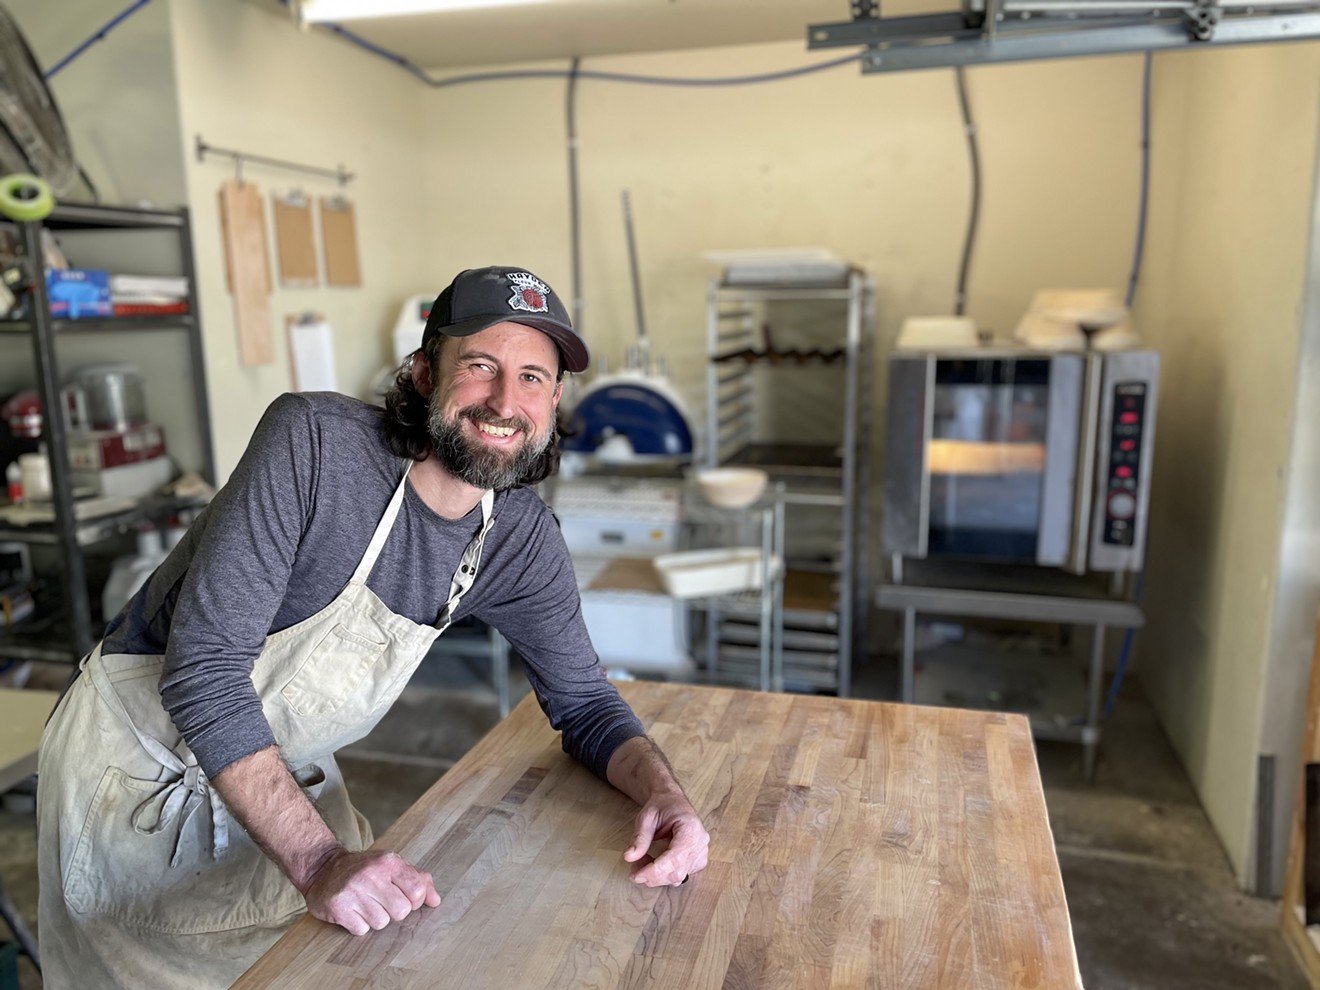 Mark Bookhamer founded Nice Buns Bakery out of his garage in Tempe in 2021.